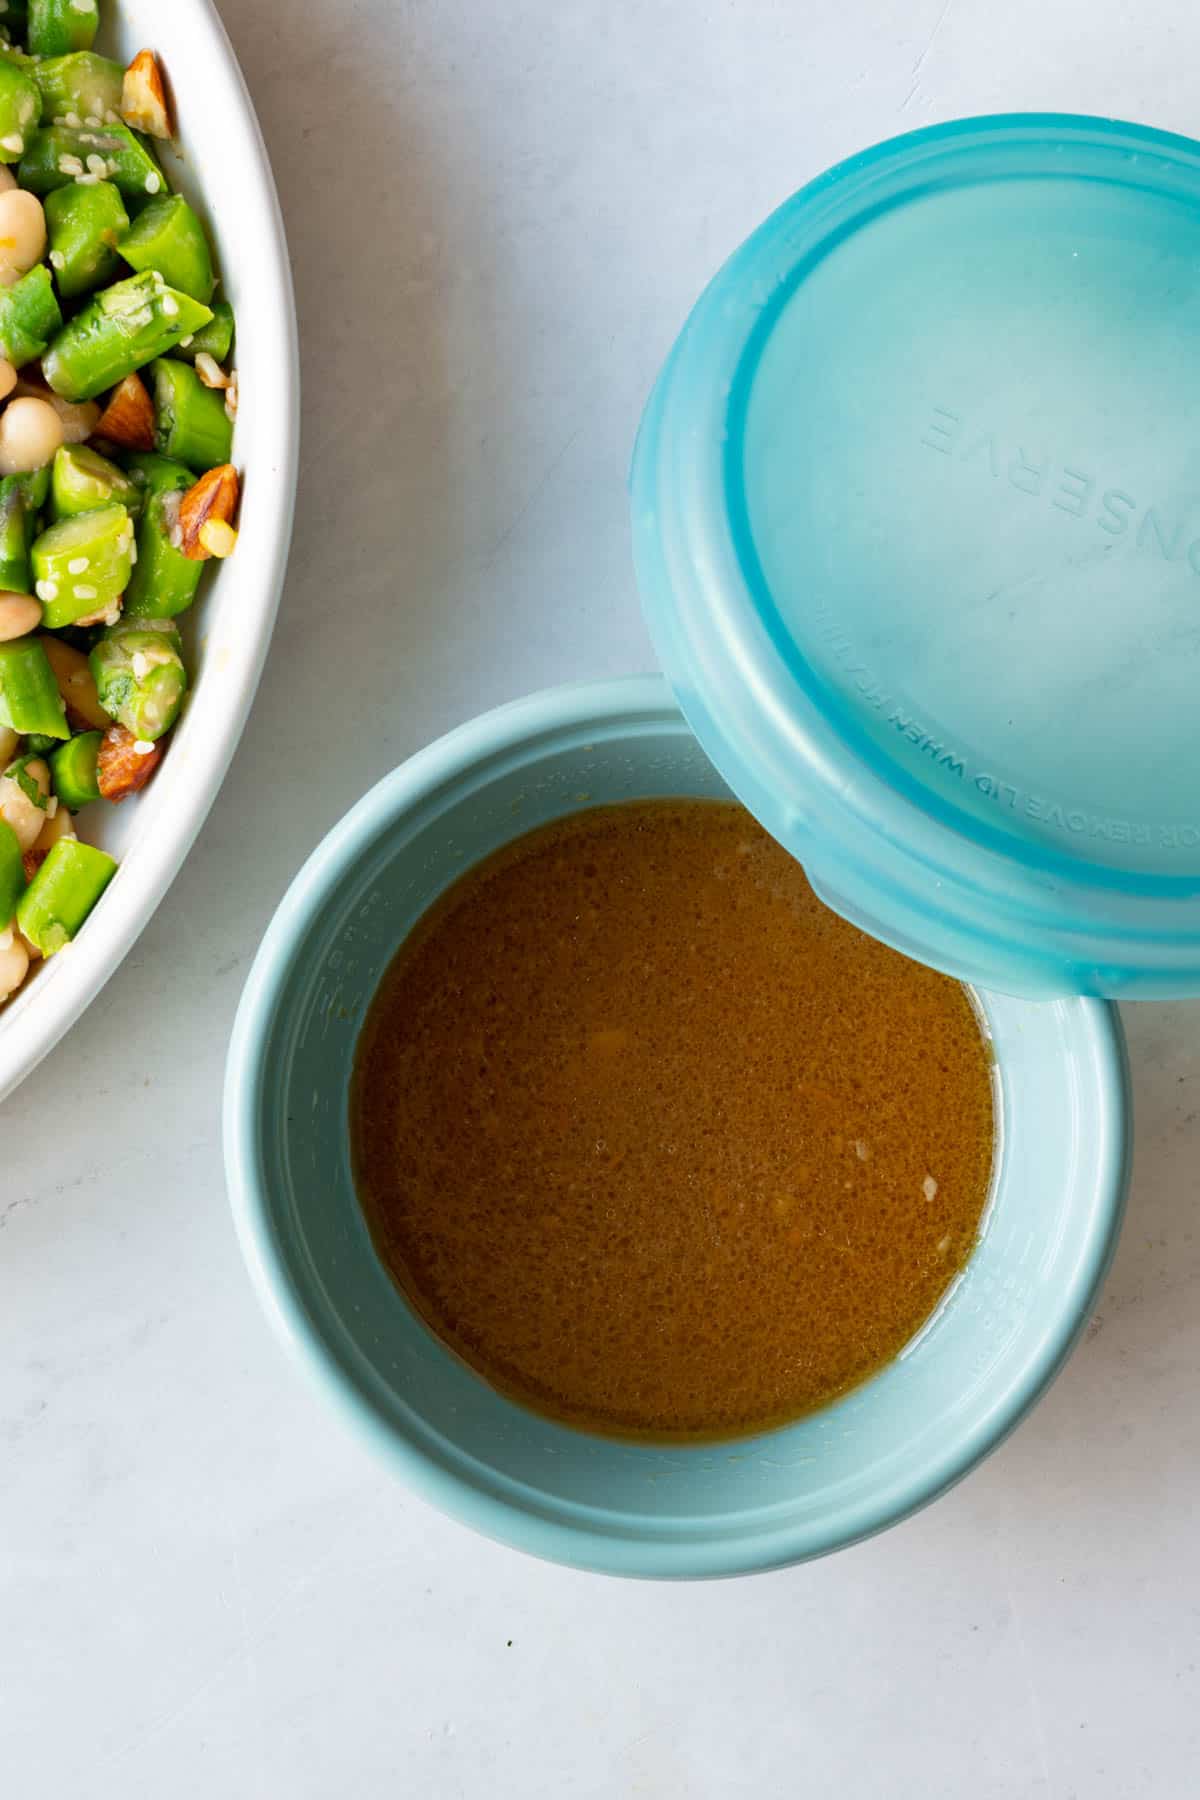 Miso dressing in a small turquoise meal prep container next to a white bowl with chopped veggies.